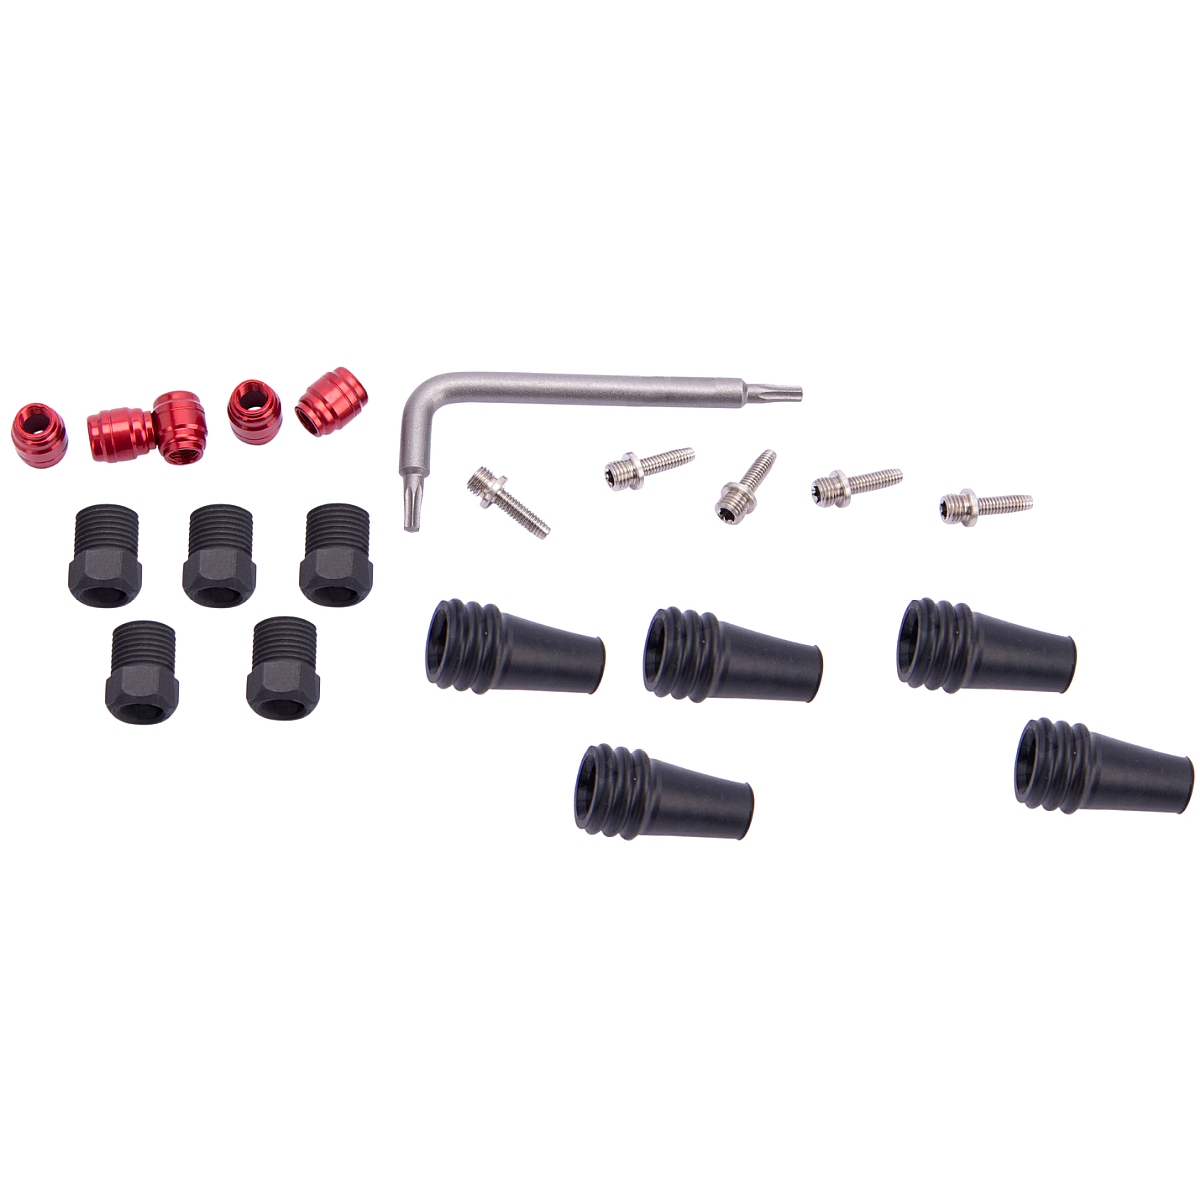 Image of SRAM Hose Fitting Kit Stealthamajig for Red eTap AXS / Force eTap AXS Disc Brakes - 11.5018.061.000